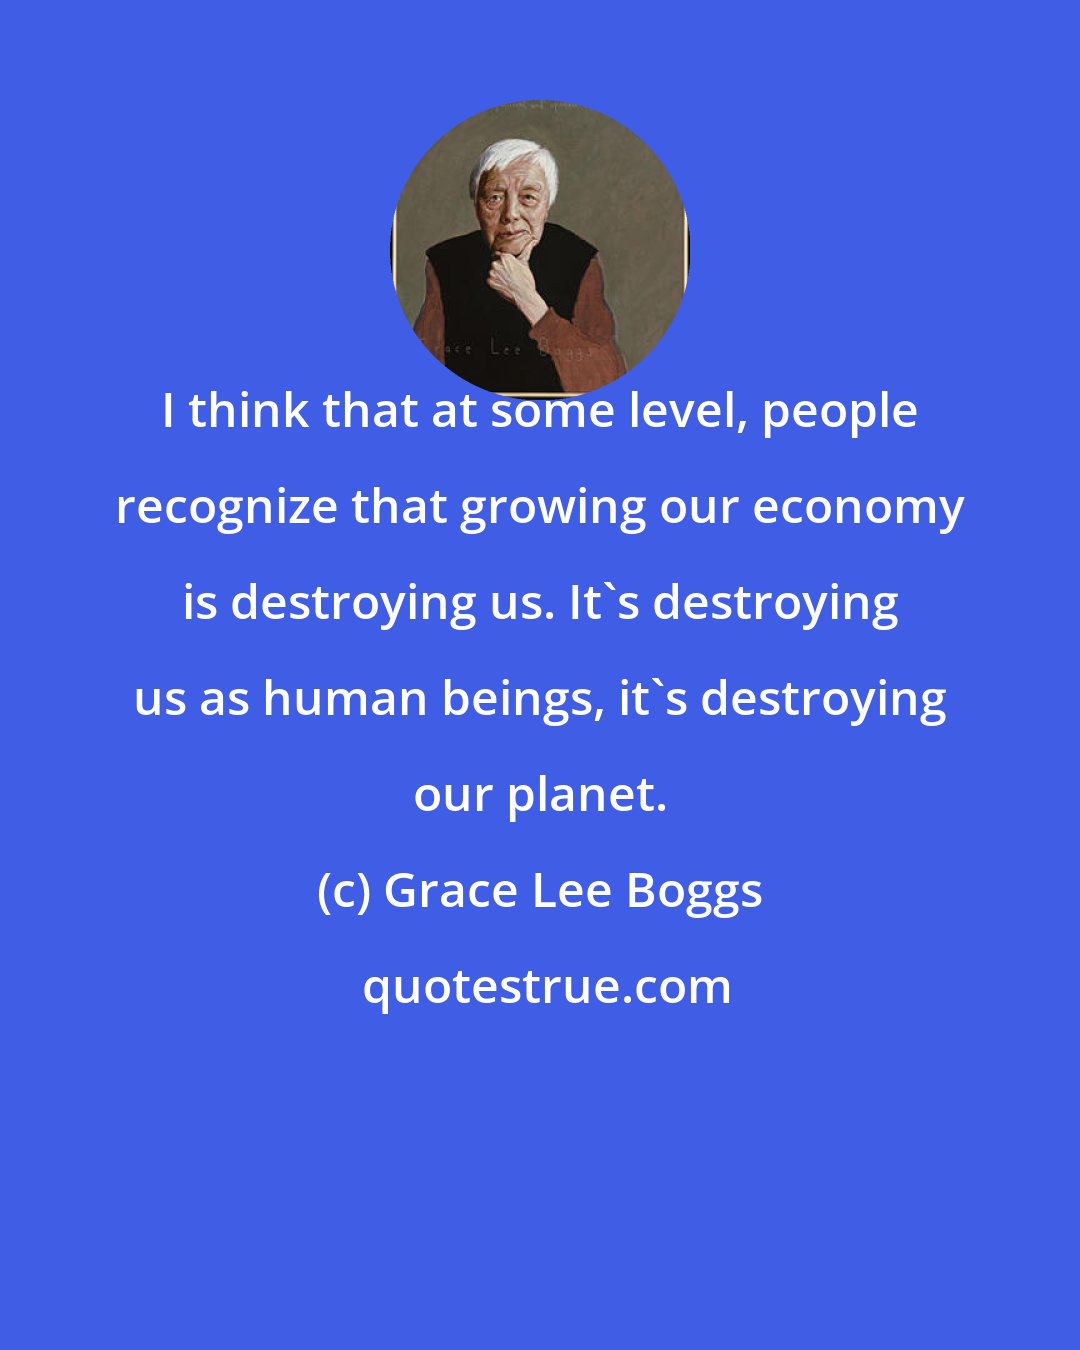 Grace Lee Boggs: I think that at some level, people recognize that growing our economy is destroying us. It's destroying us as human beings, it's destroying our planet.